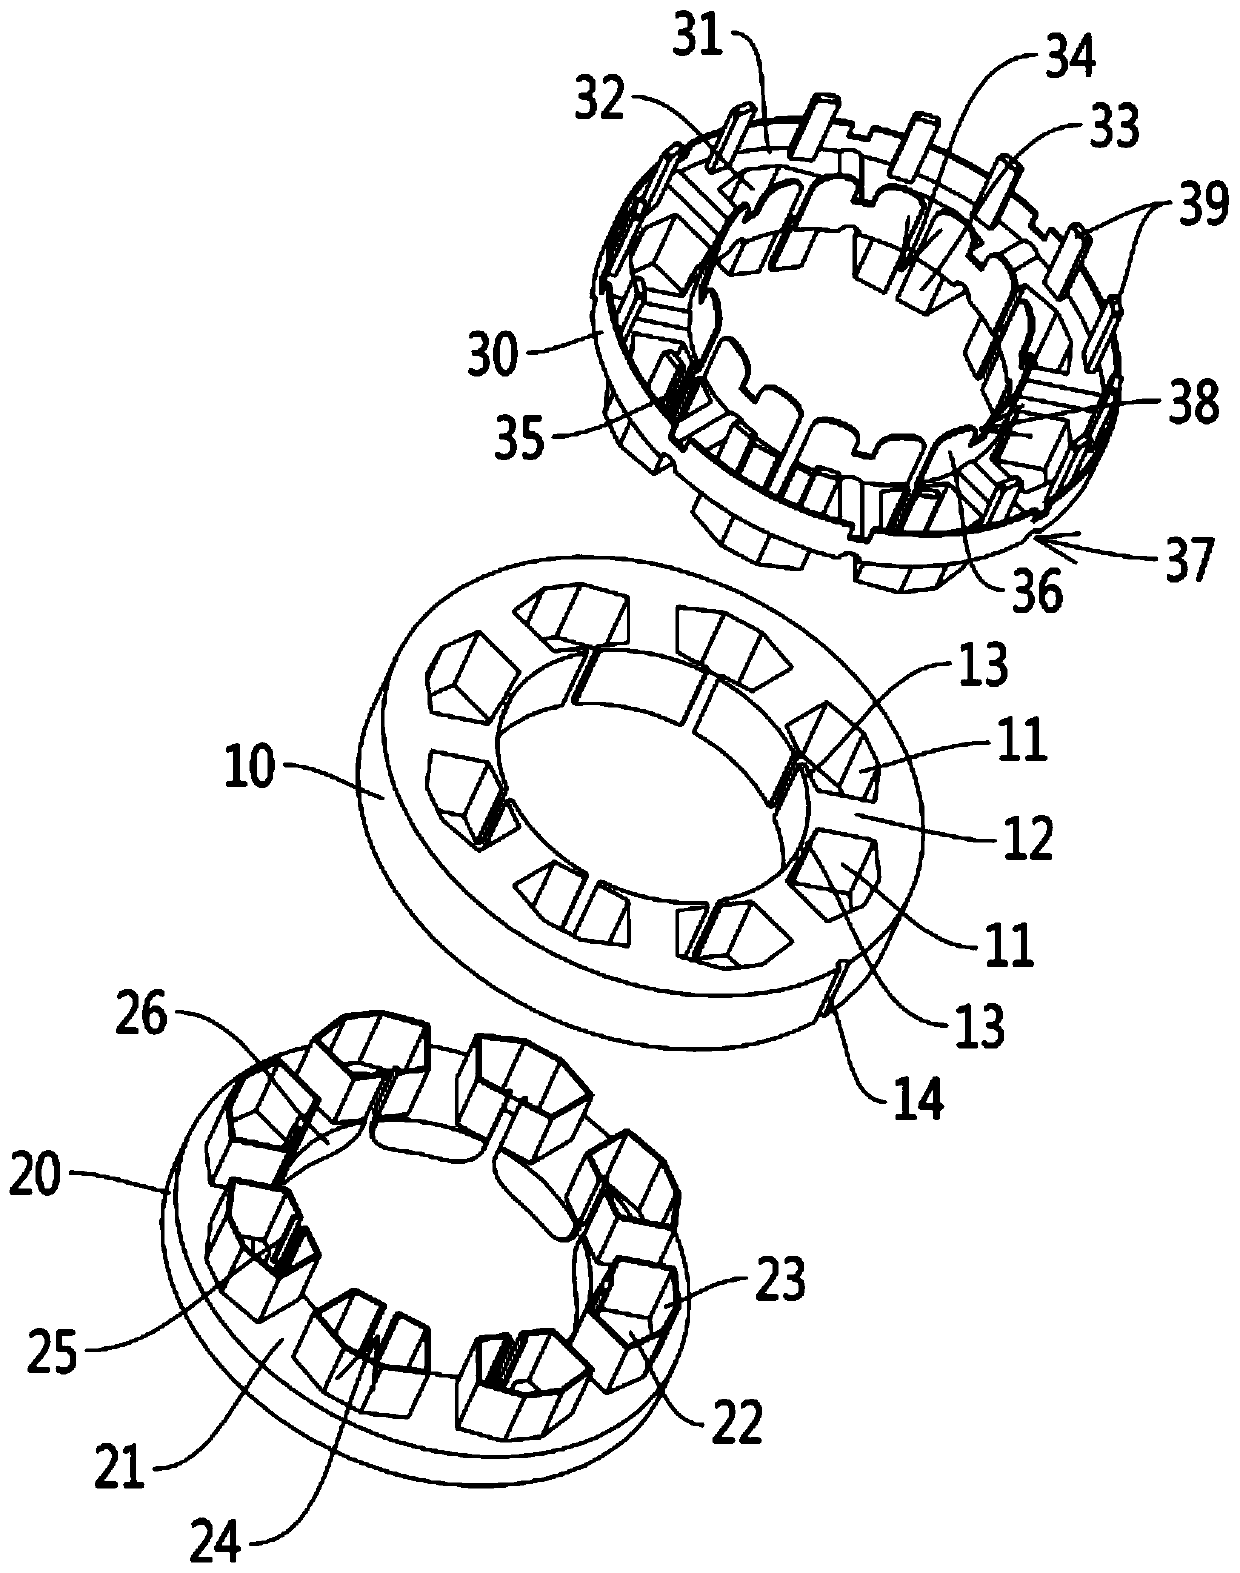 Internally-wound stator for preventing high-voltage electric leakage